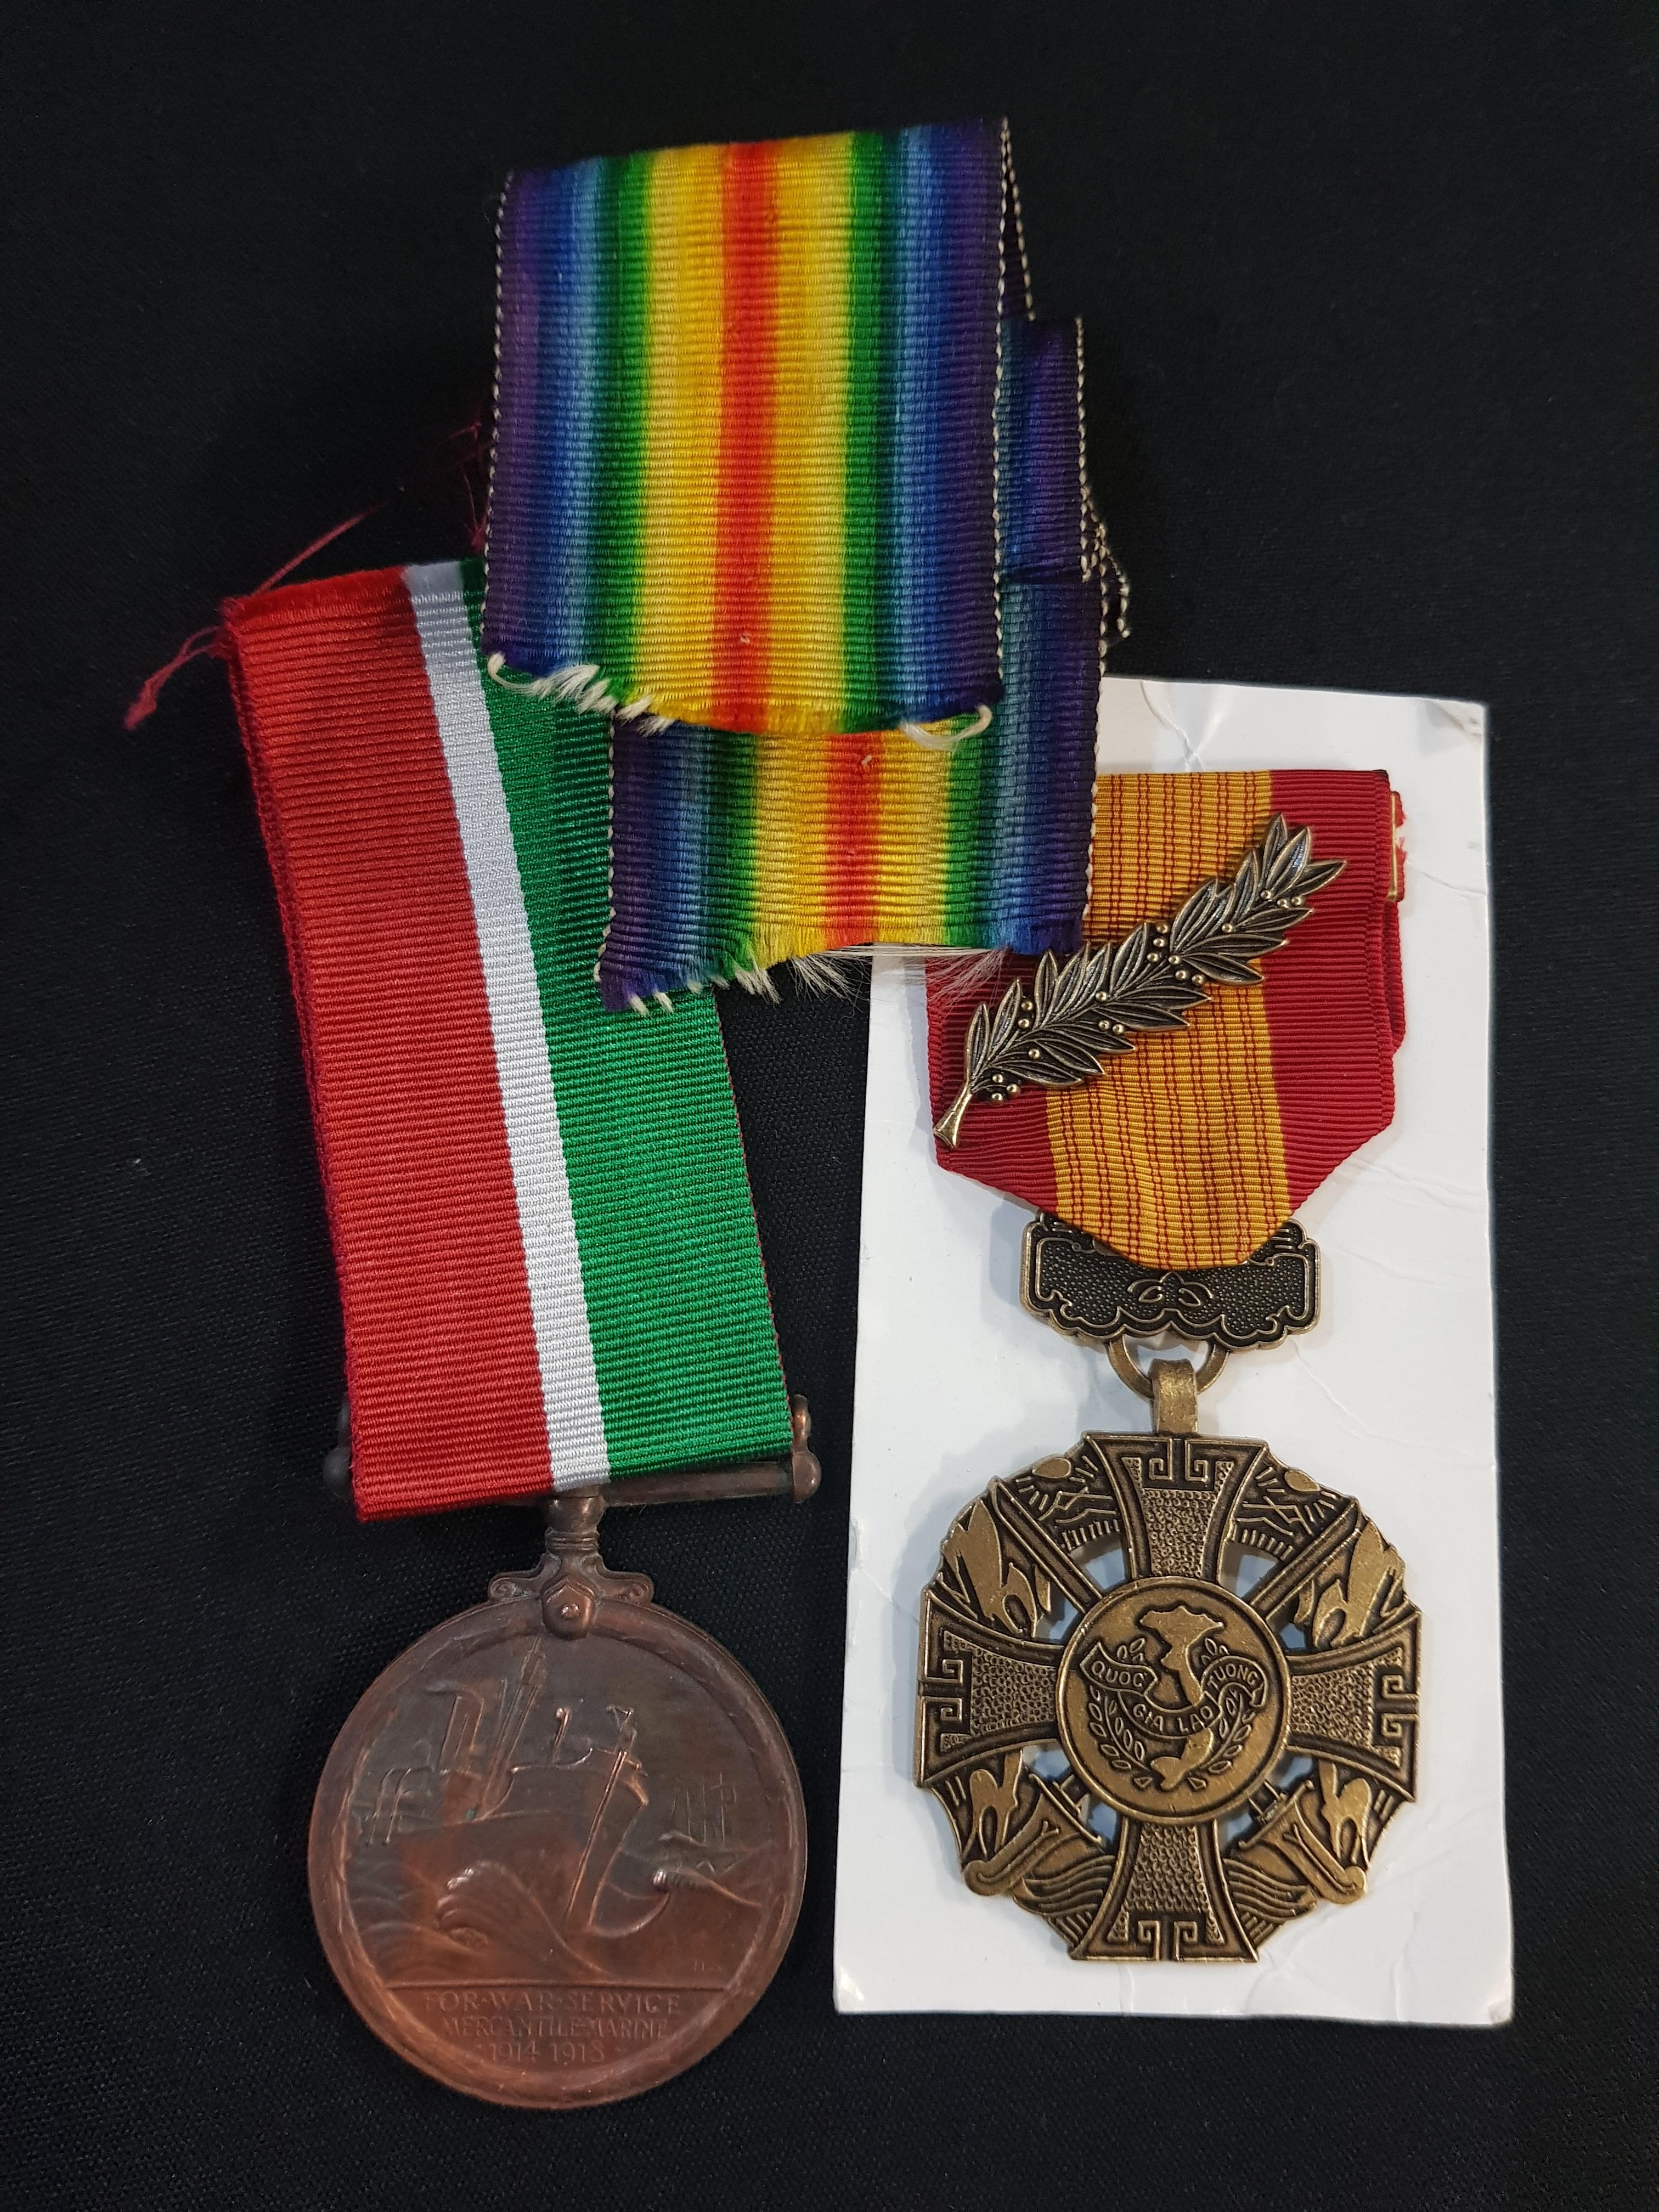 2 MILITARY MEDALS